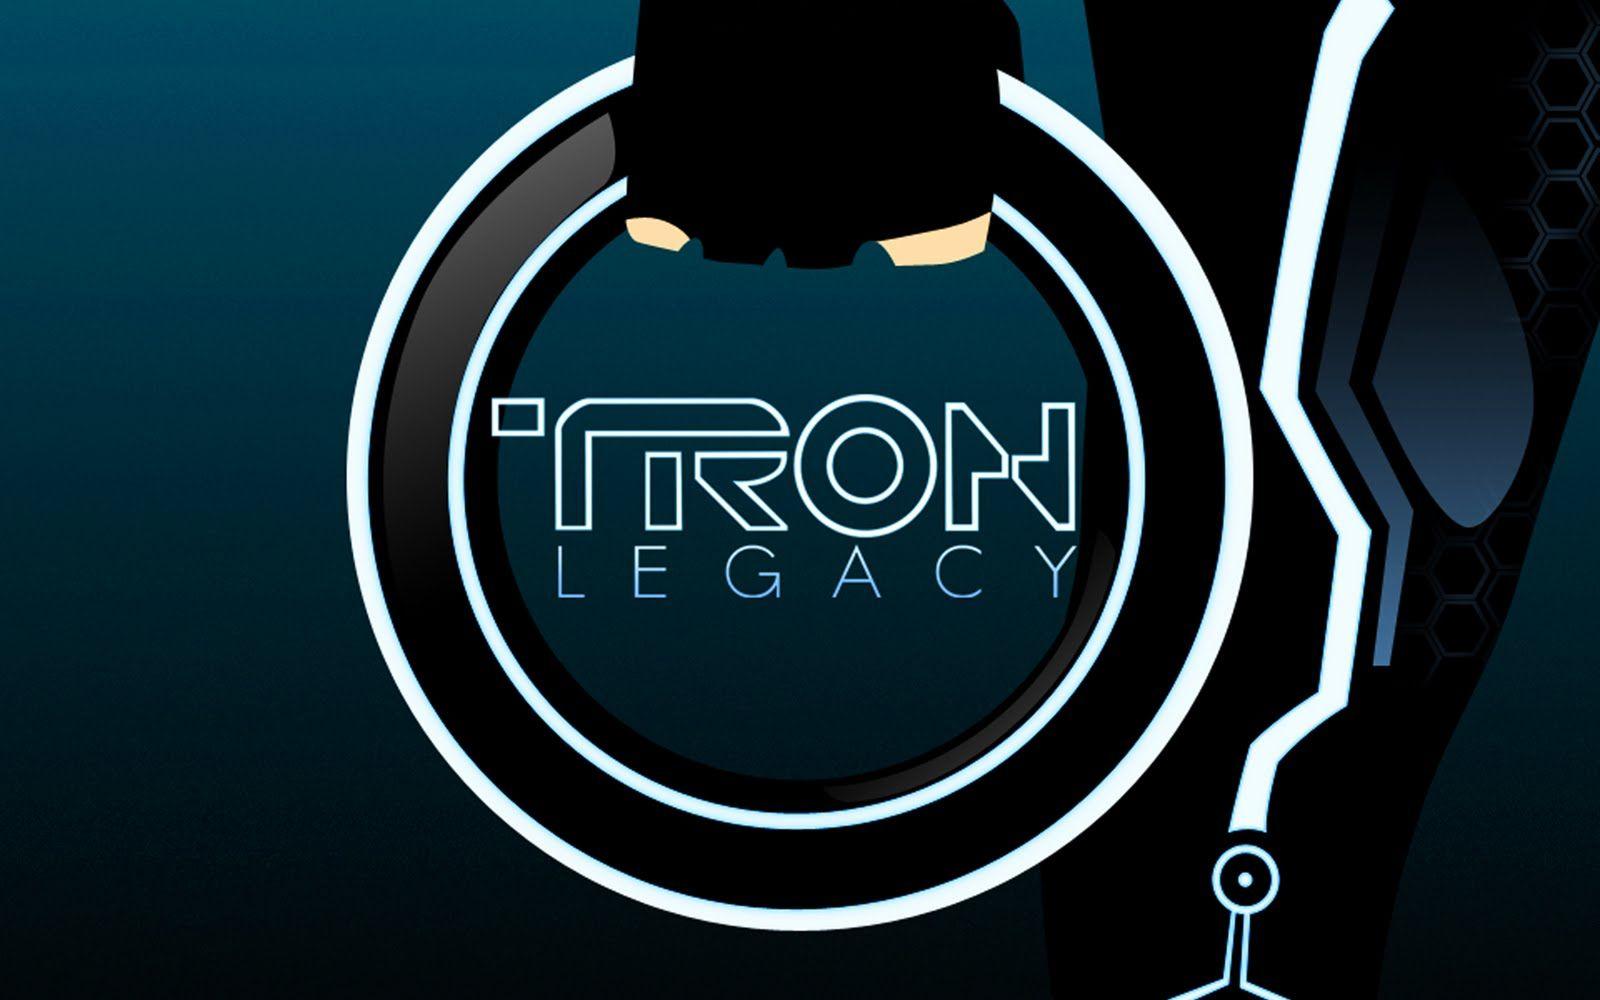 That&;s How I Party: Lil Tron Legacy Wallpaper